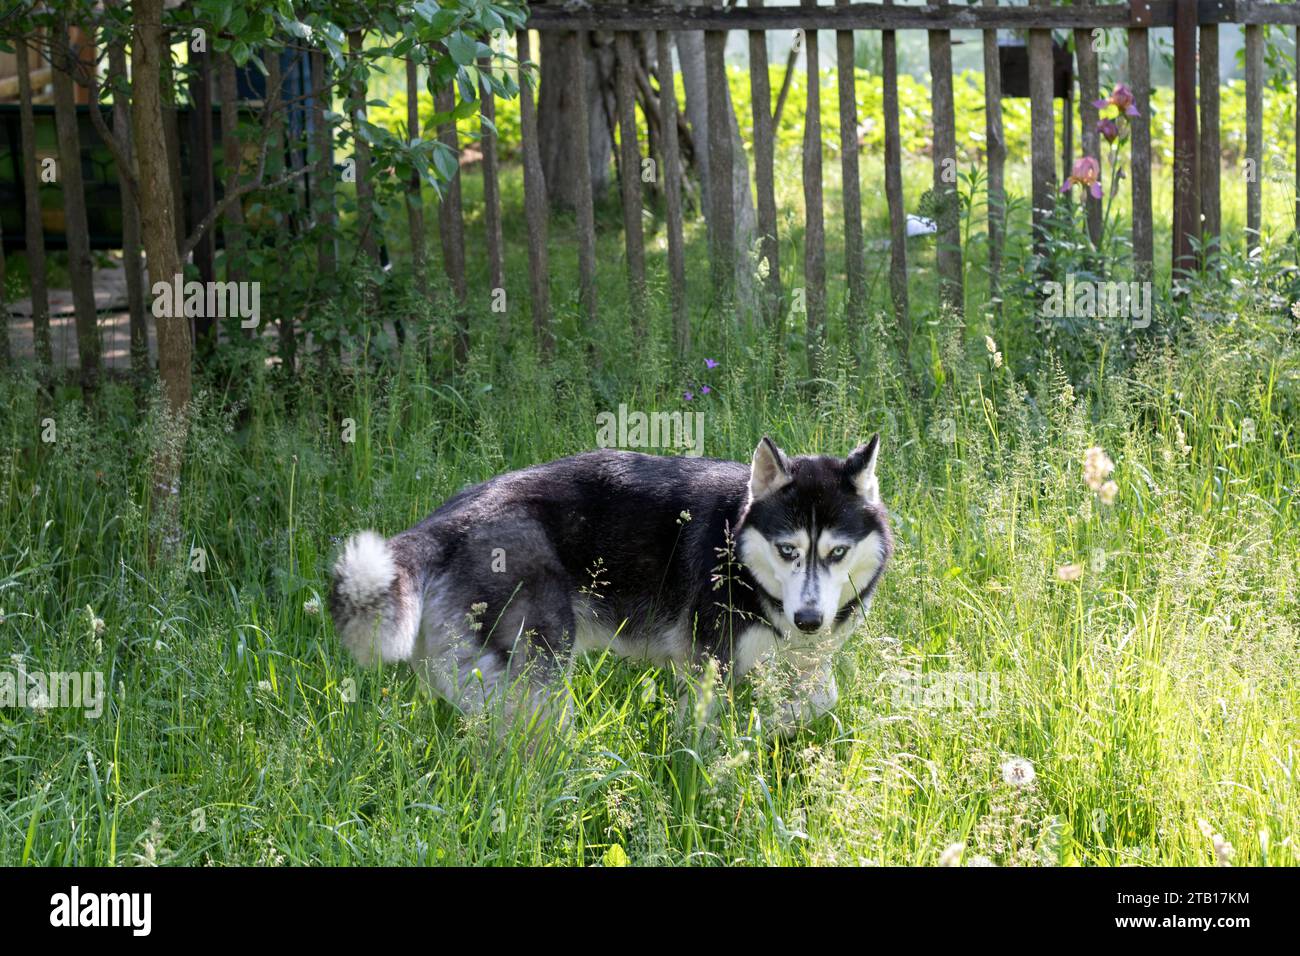 Siberian husky, purebred dog, looking, active, grass, animal, pet, dog, doggy, friend, mammal, purebred, photography, breed, happy, rest, lawn, playful Stock Photo